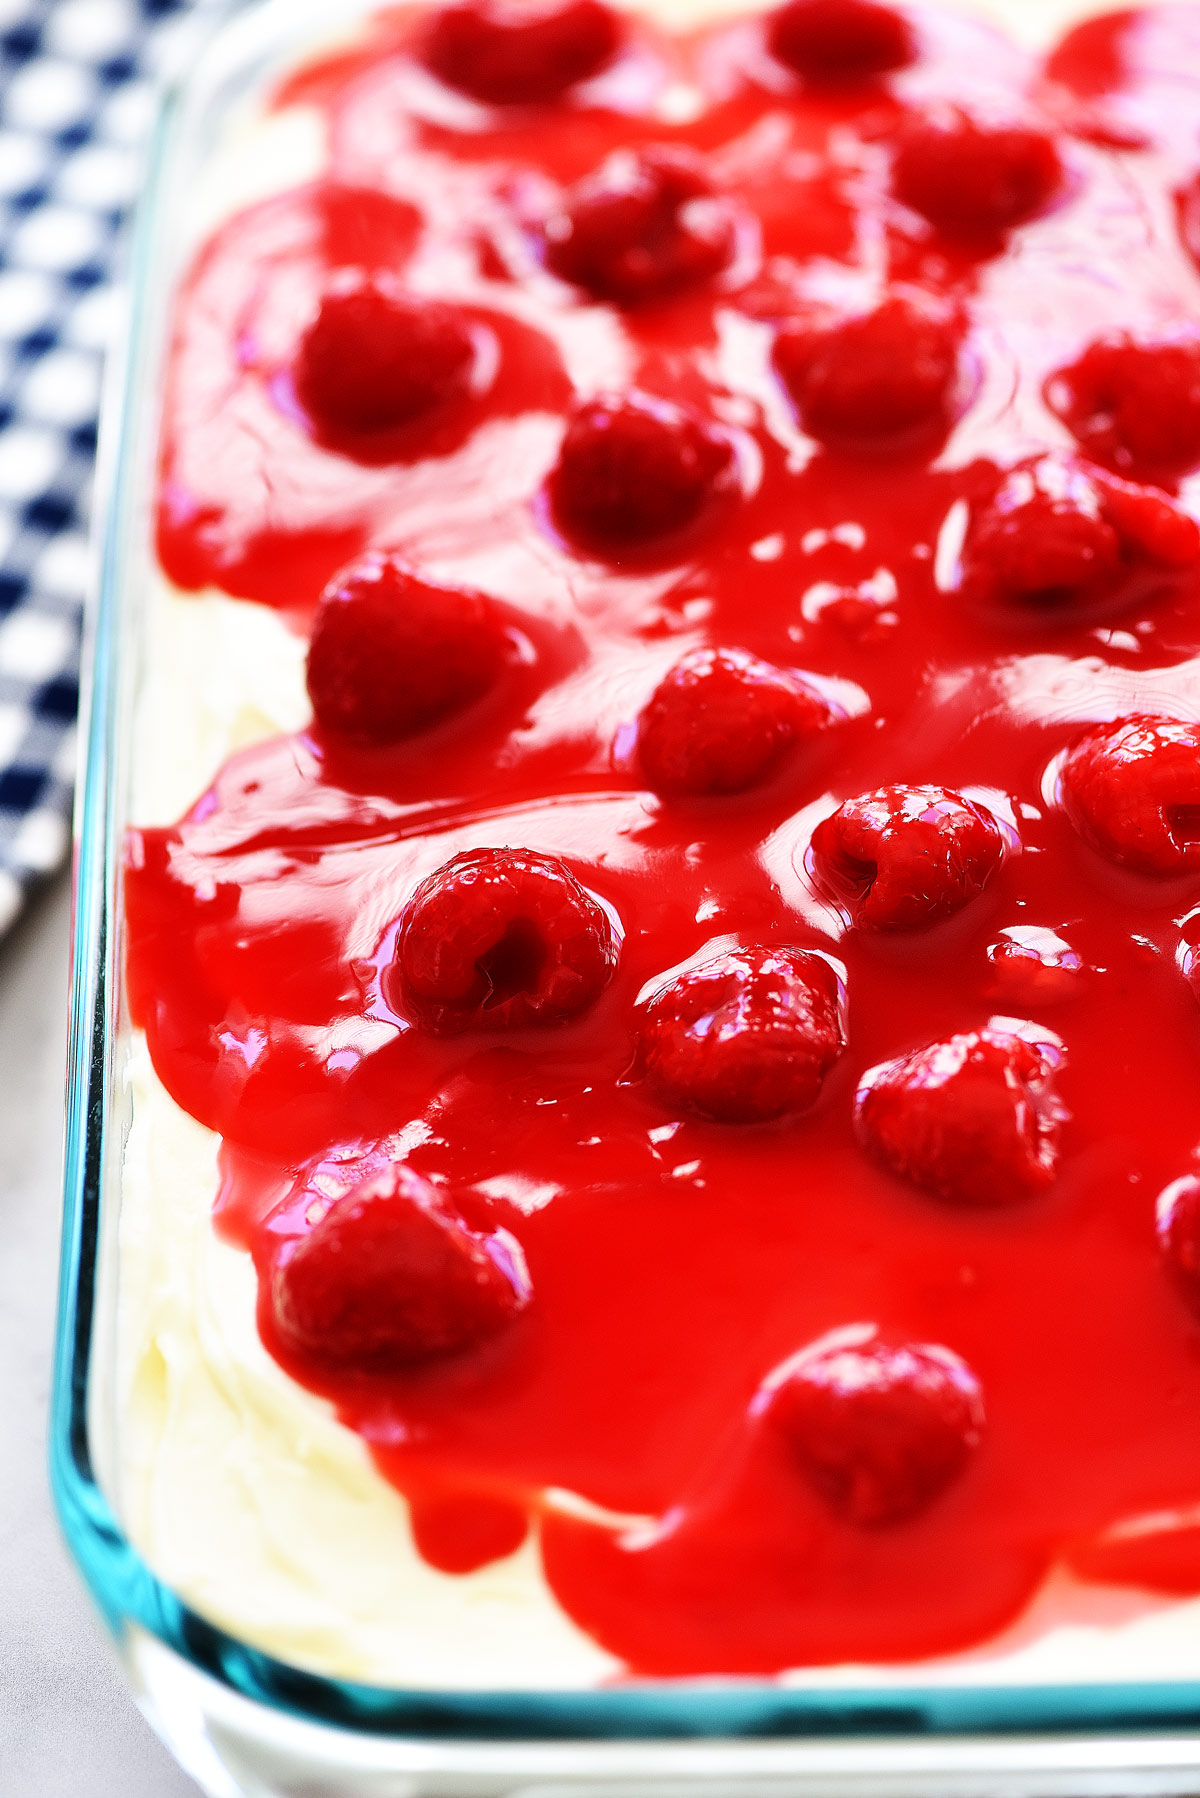 Raspberry Cream Cake is a moist and delicious white cake with a whipped cream cheese layer and raspberry glaze topping. Life-in-the-Lofthouse.com